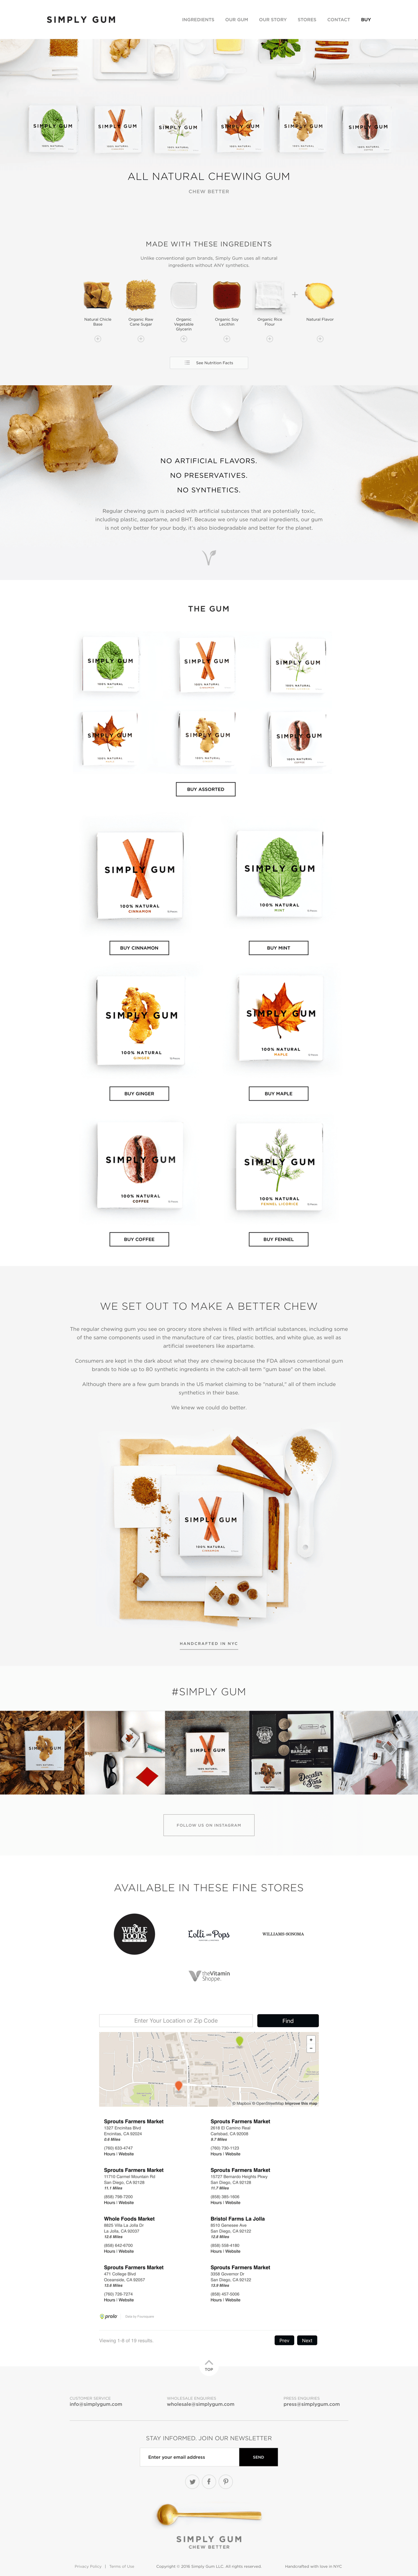 Simply Gum - All Natural Chewing Gum